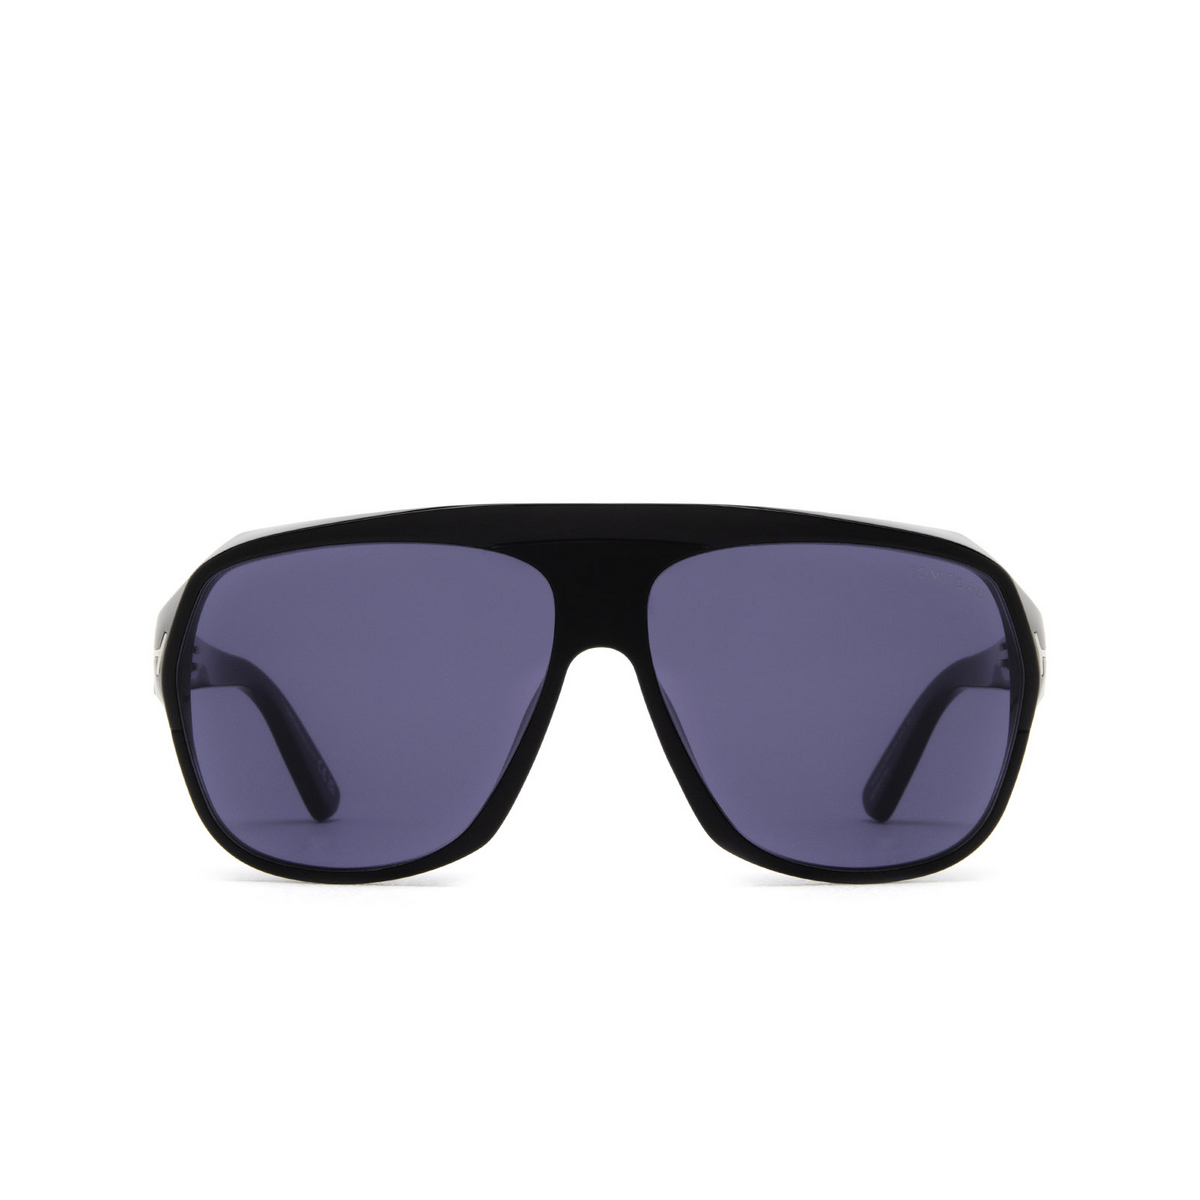 Tom Ford® Square Sunglasses: Hawkings-02 FT0908 color Black 01V - front view.